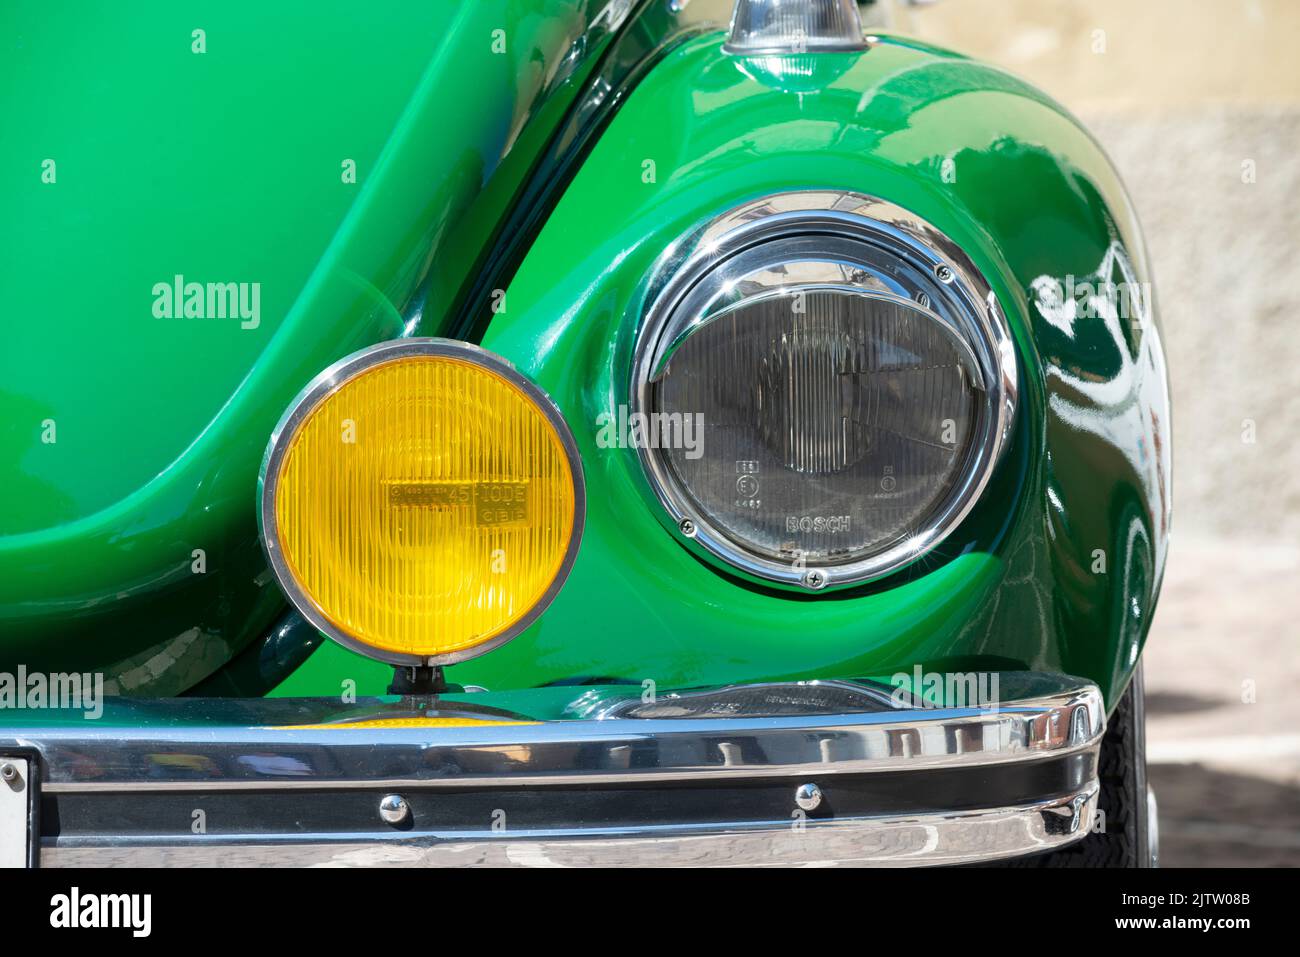 Italy, Lombardy, Meeting of Vintage Car, Volkswagen Beetles Stock Photo